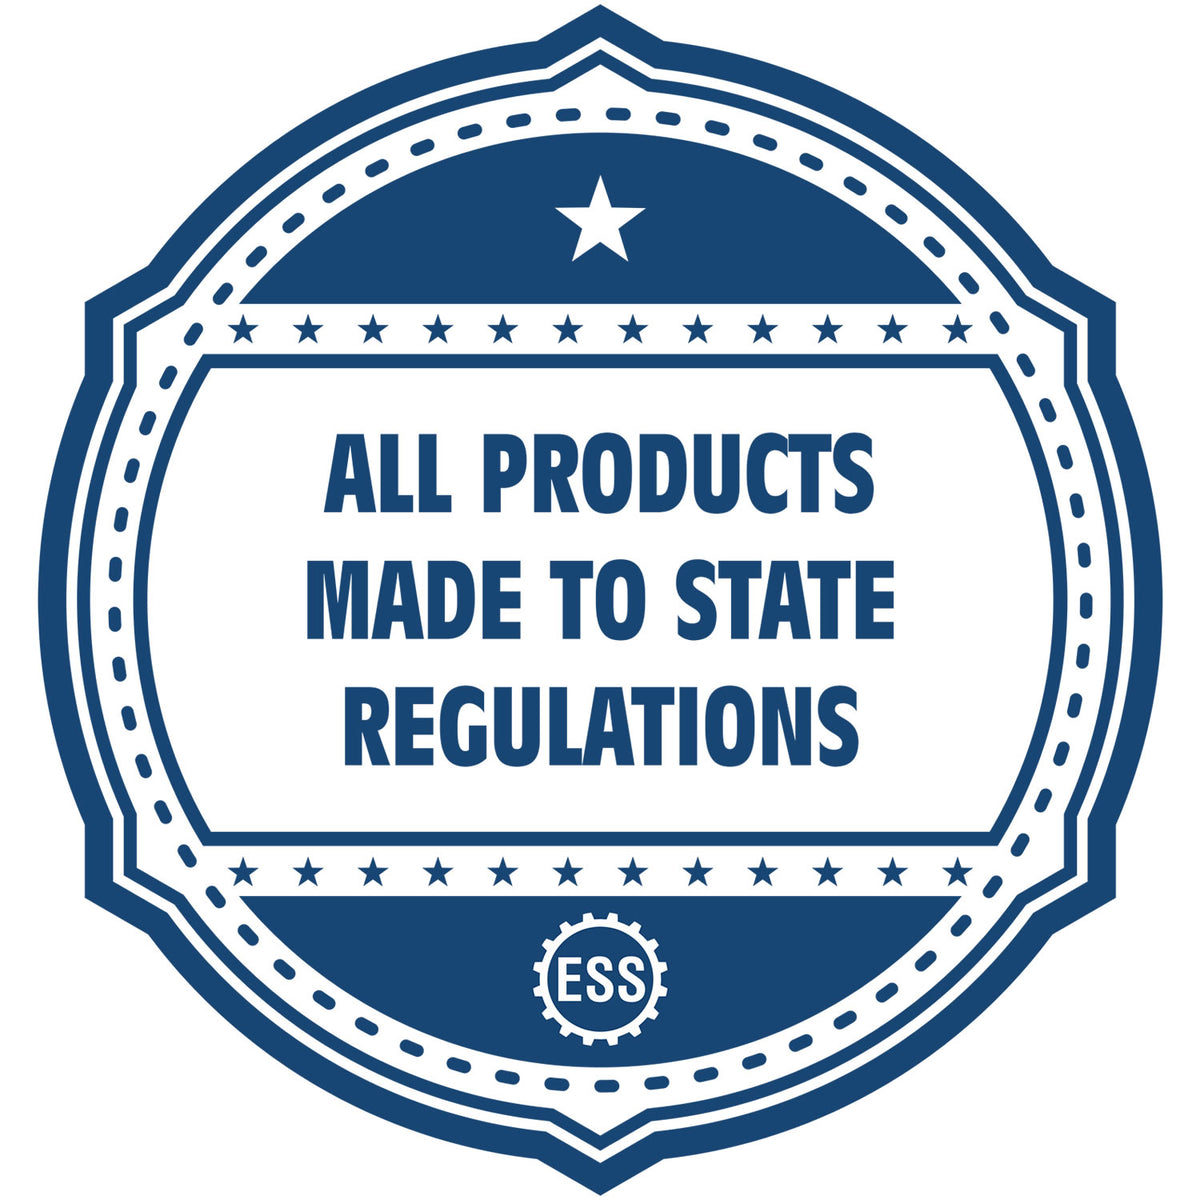 An icon or badge element for the Super Slim New York Notary Public Stamp showing that this product is made in compliance with state regulations.